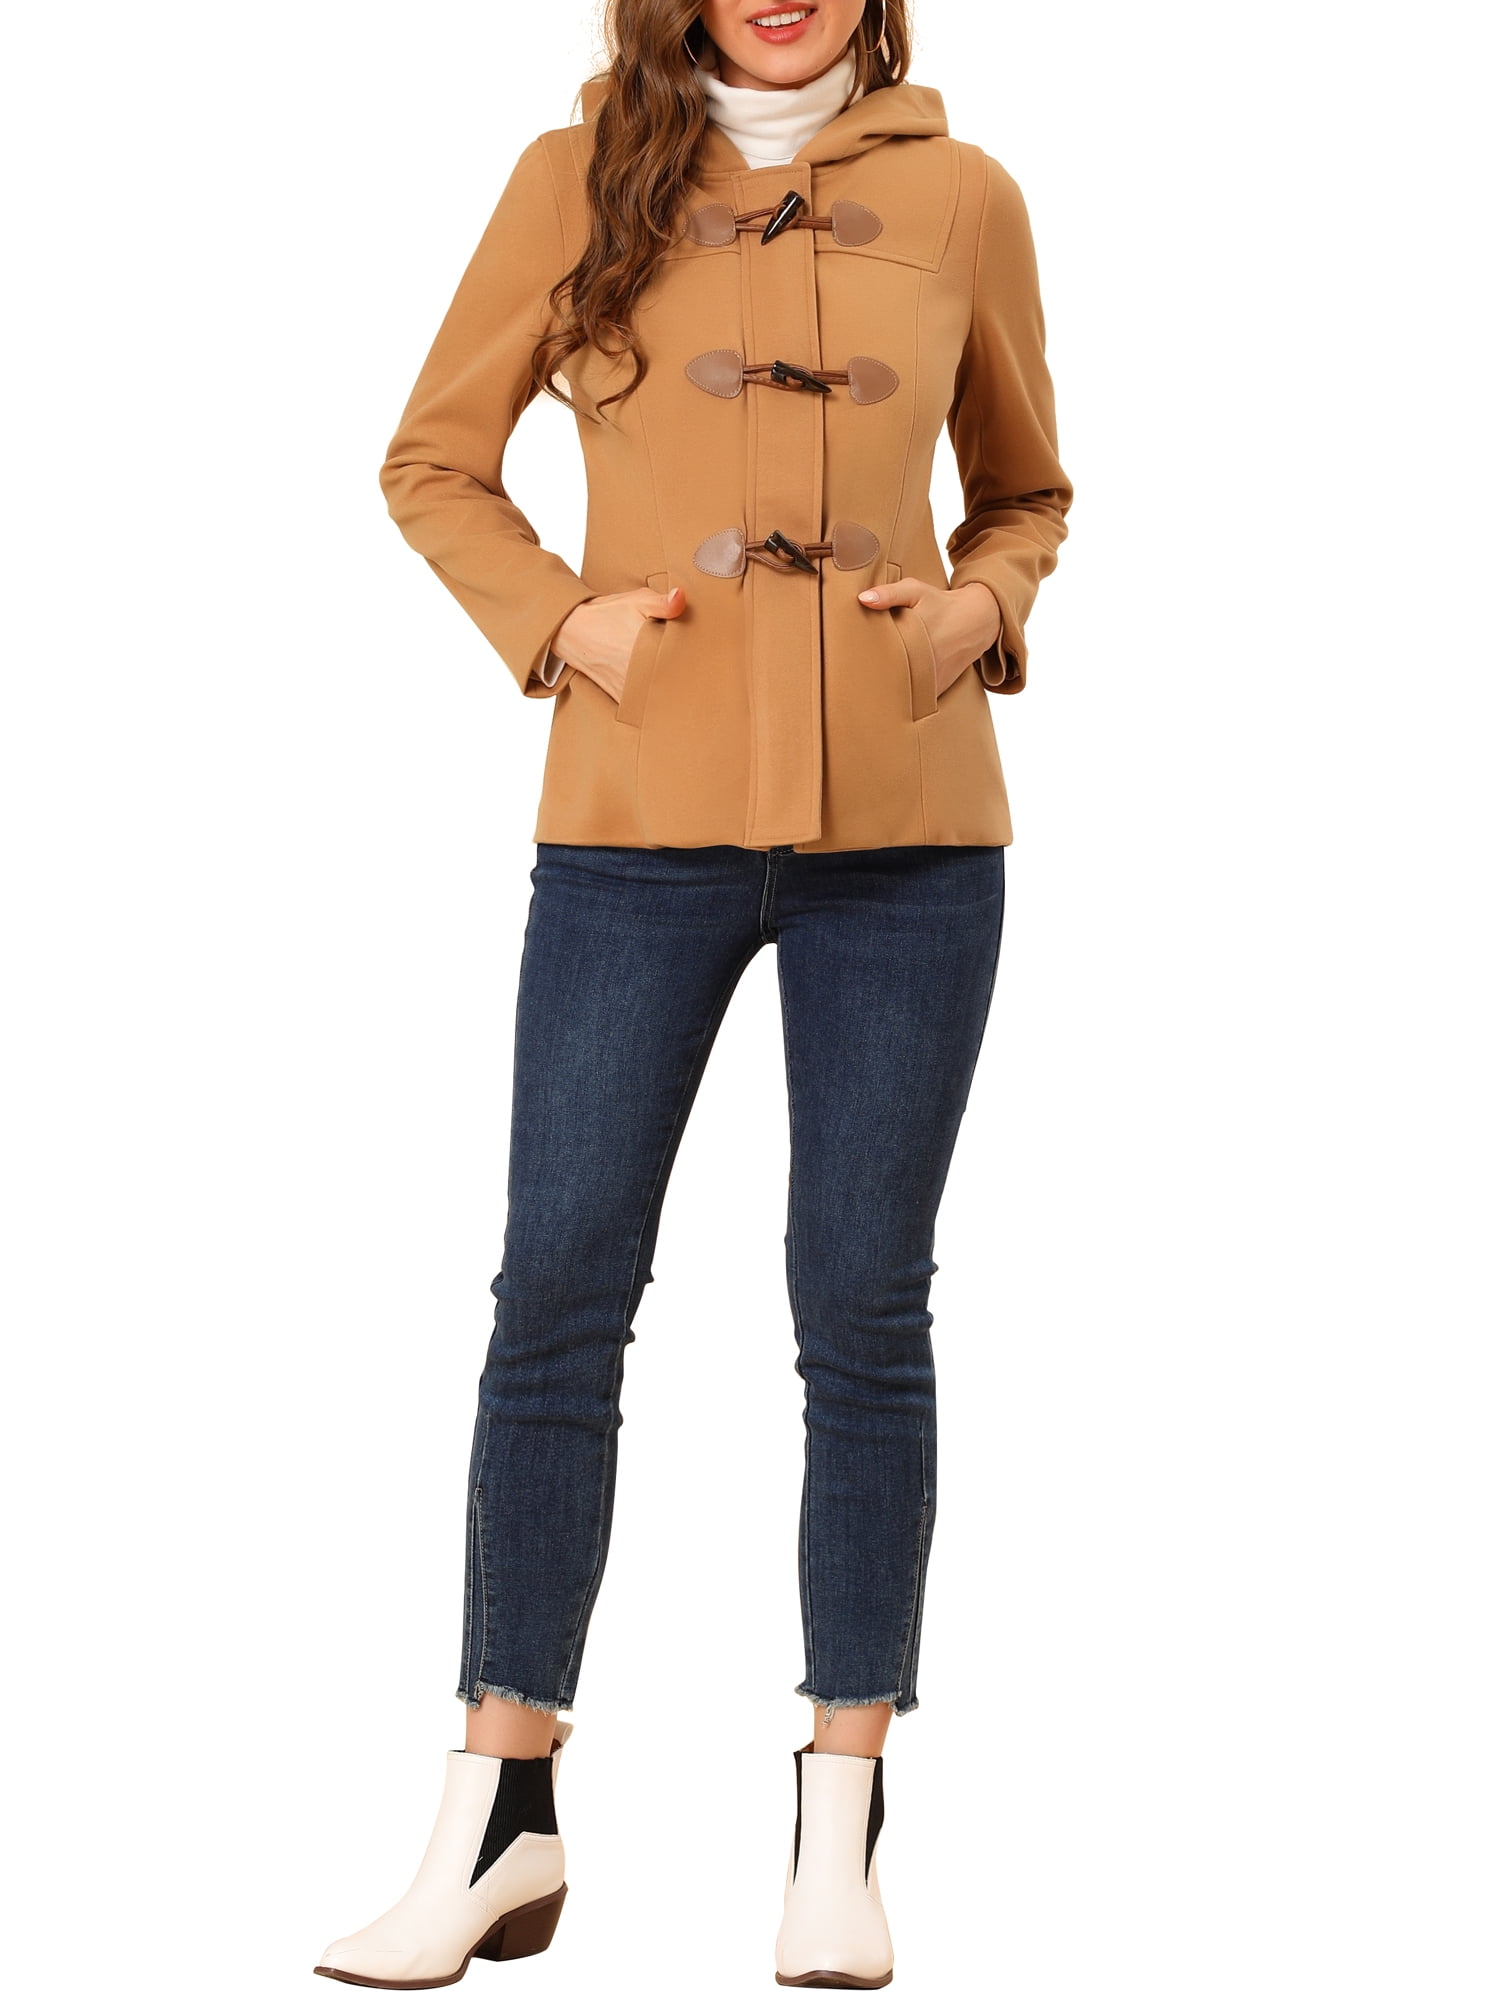 Ambiance Apparel Removable Hood Peacoats for Women